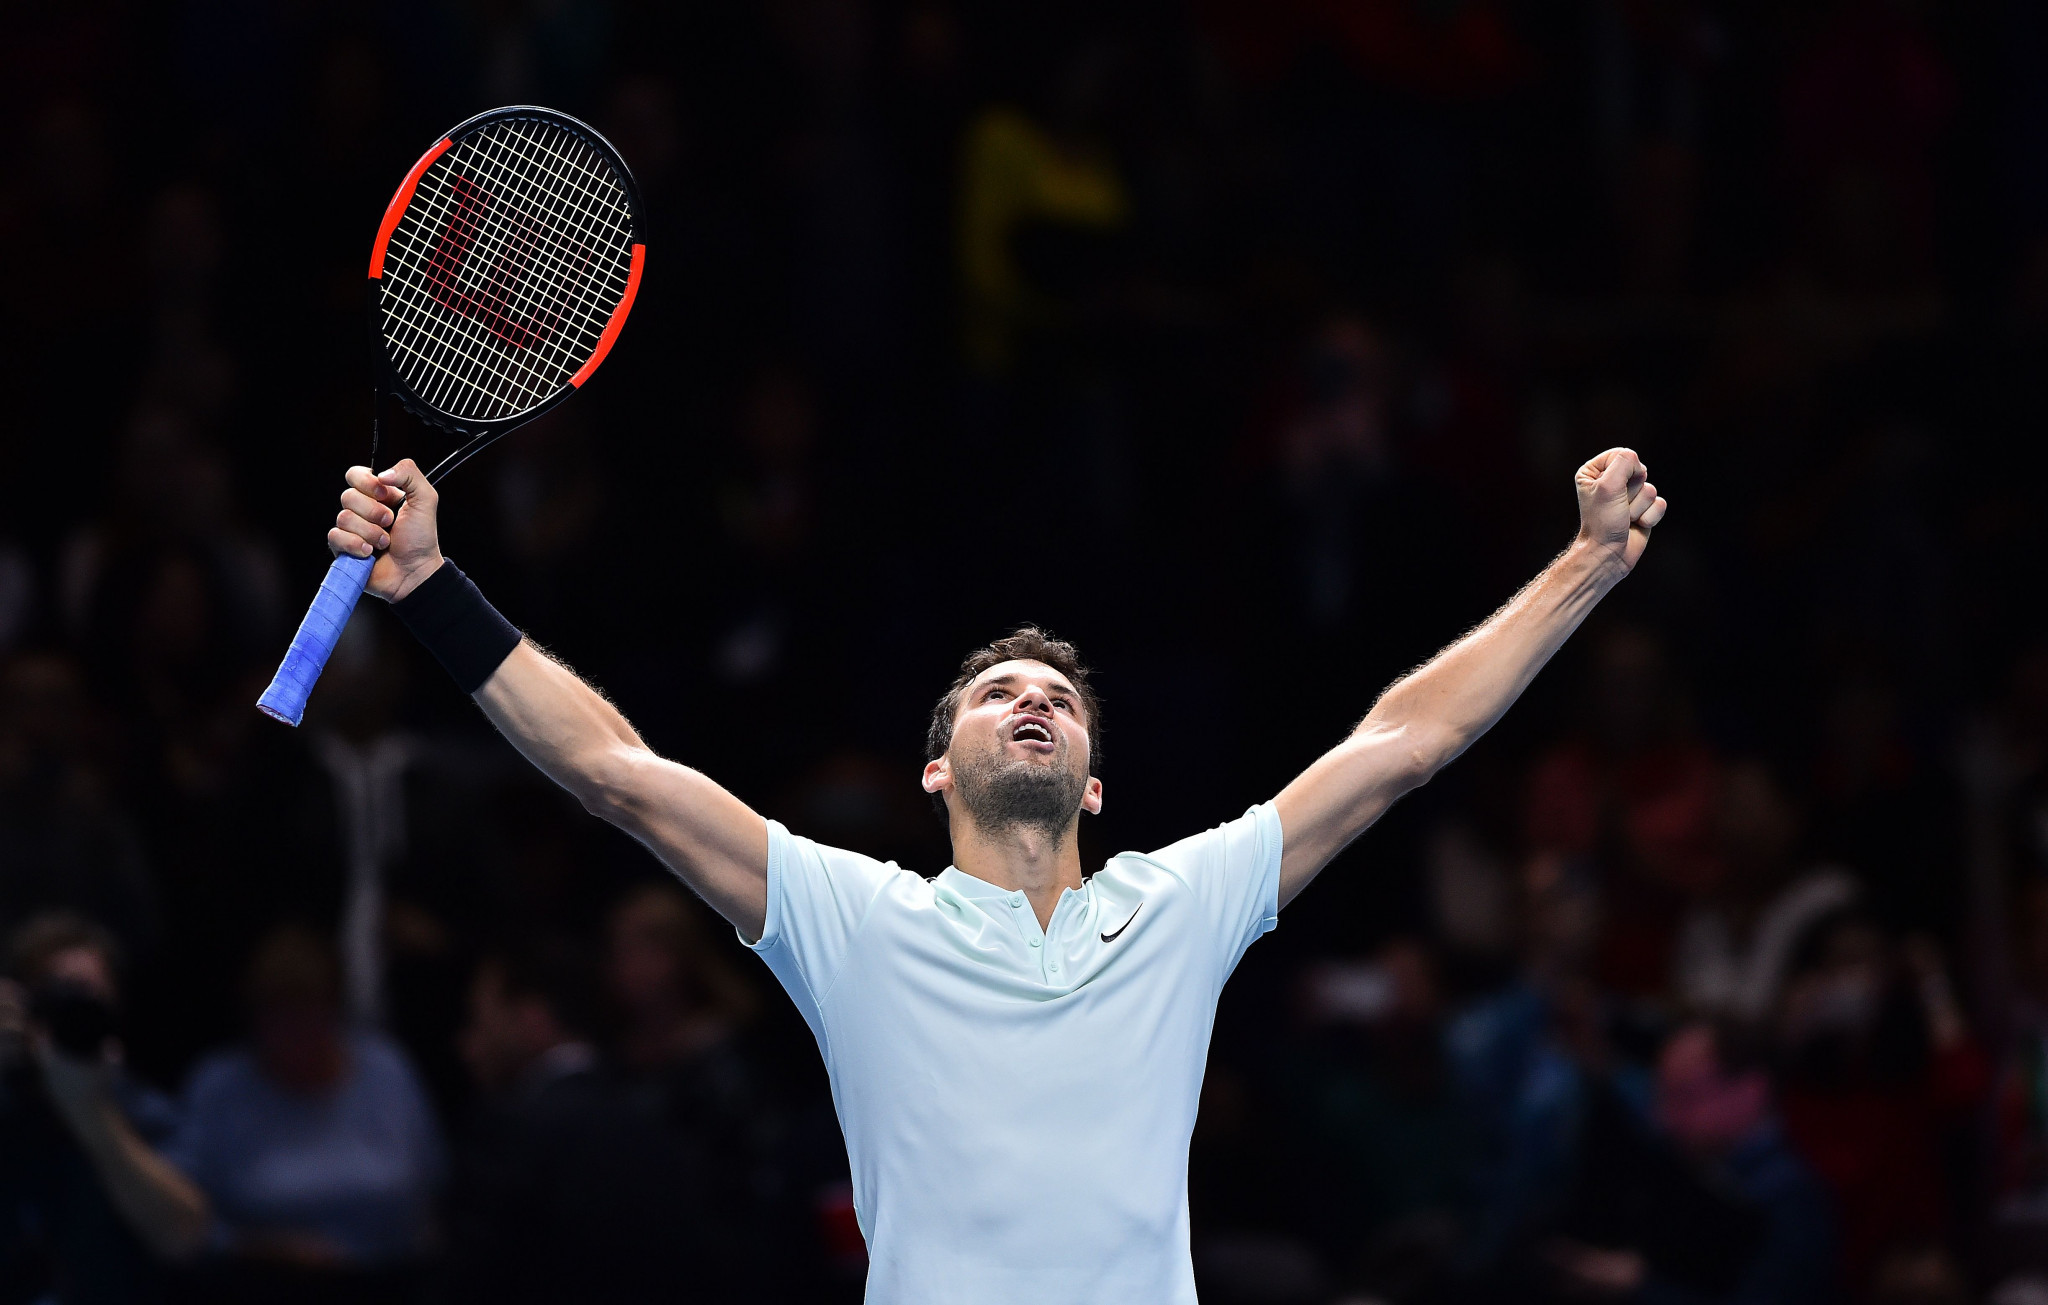 Dimitrov storms into ATP World Tour Finals last four after thrashing Goffin